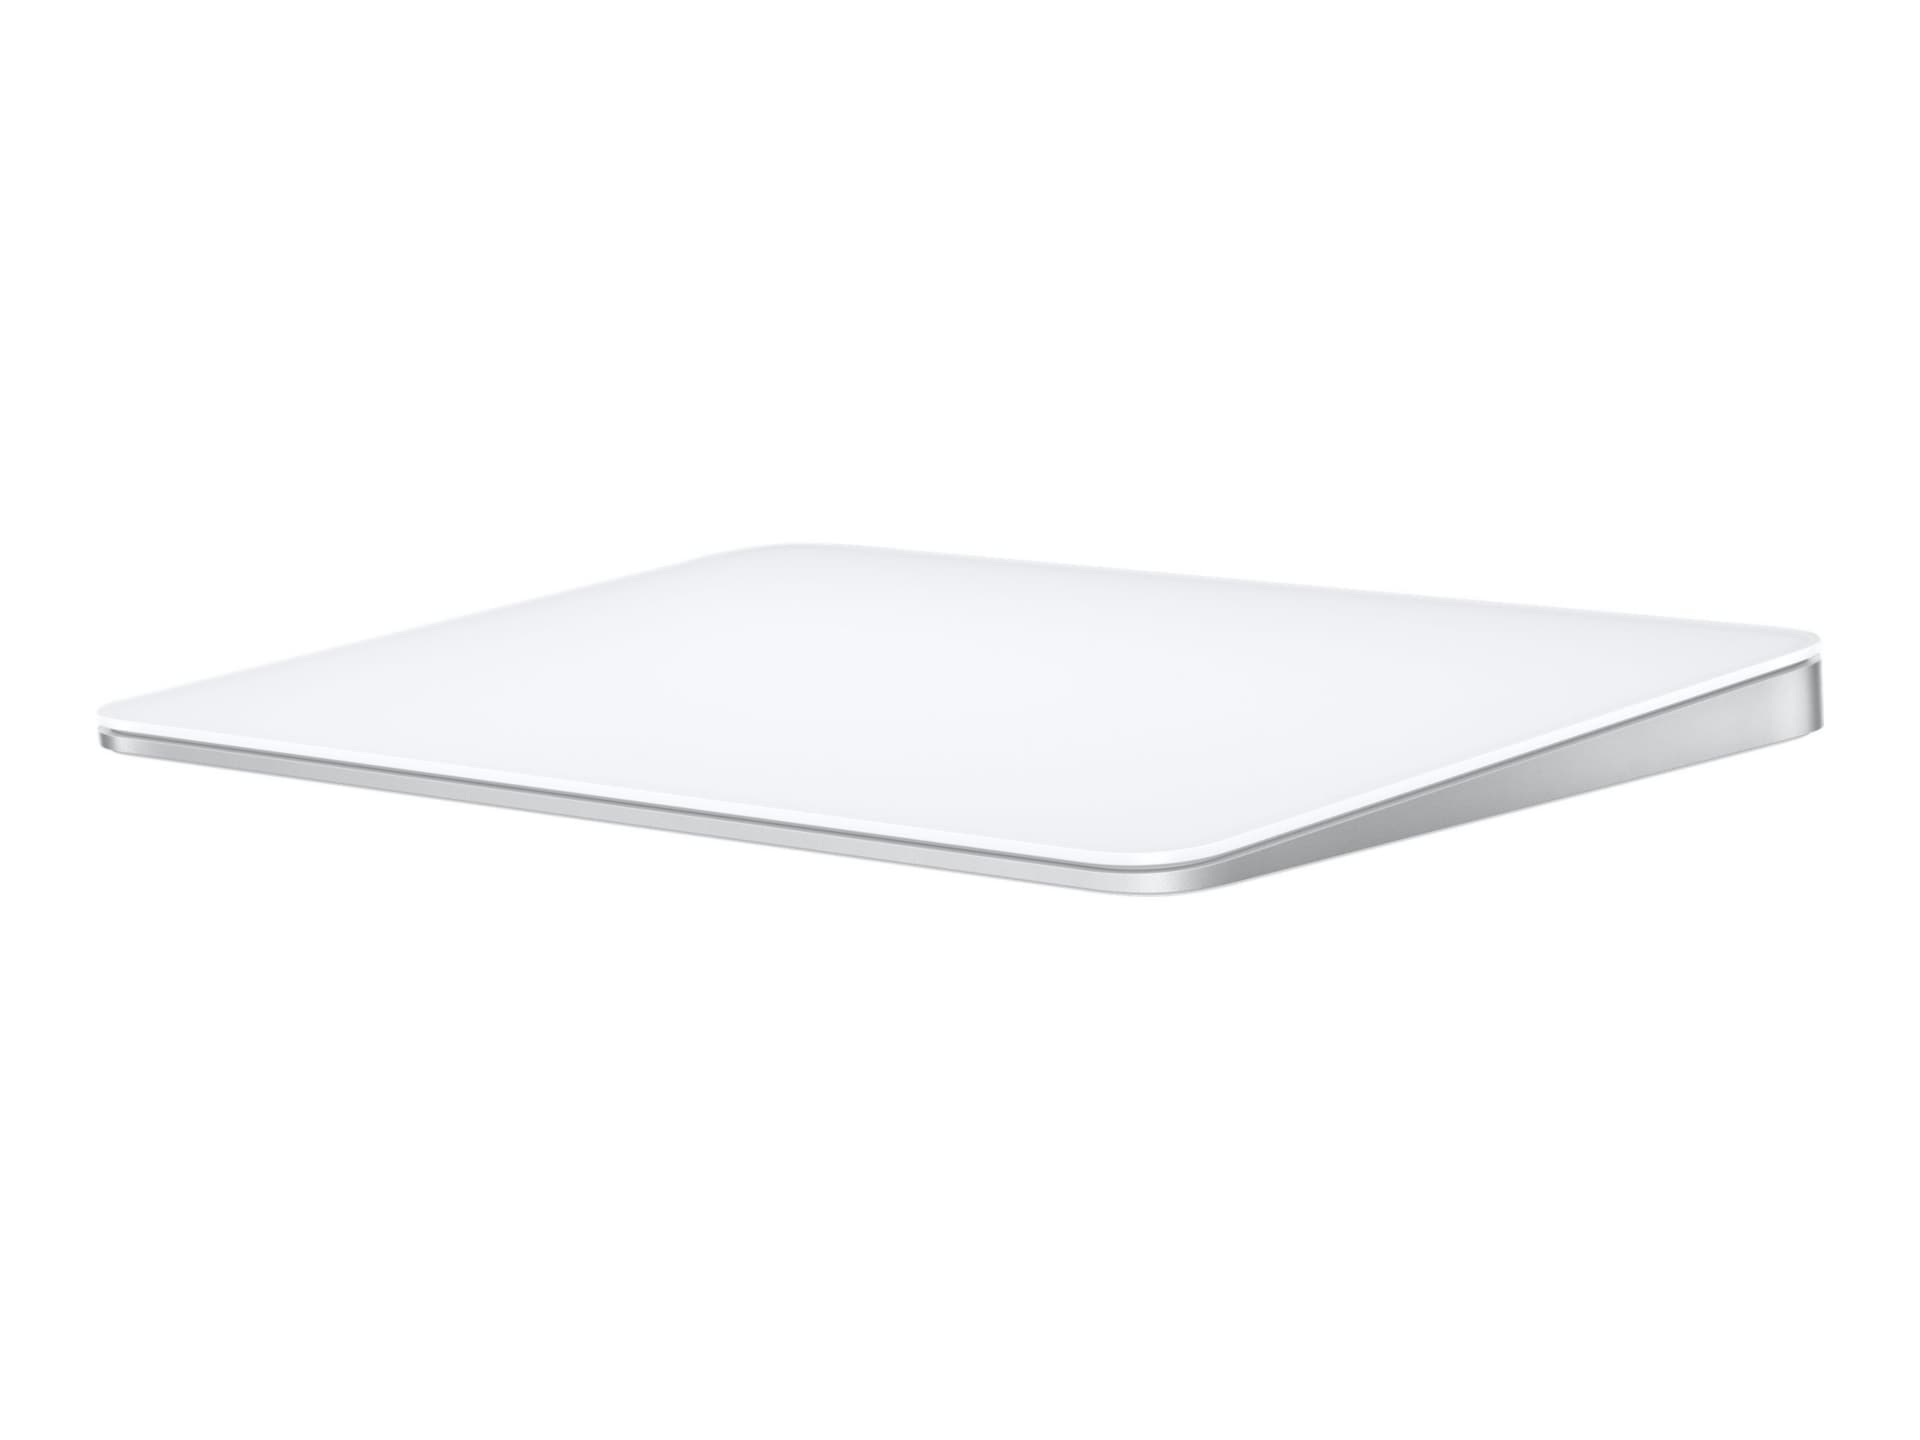 Buy Apple Magic Trackpad 2 Touchpad For MacBook (Wireless